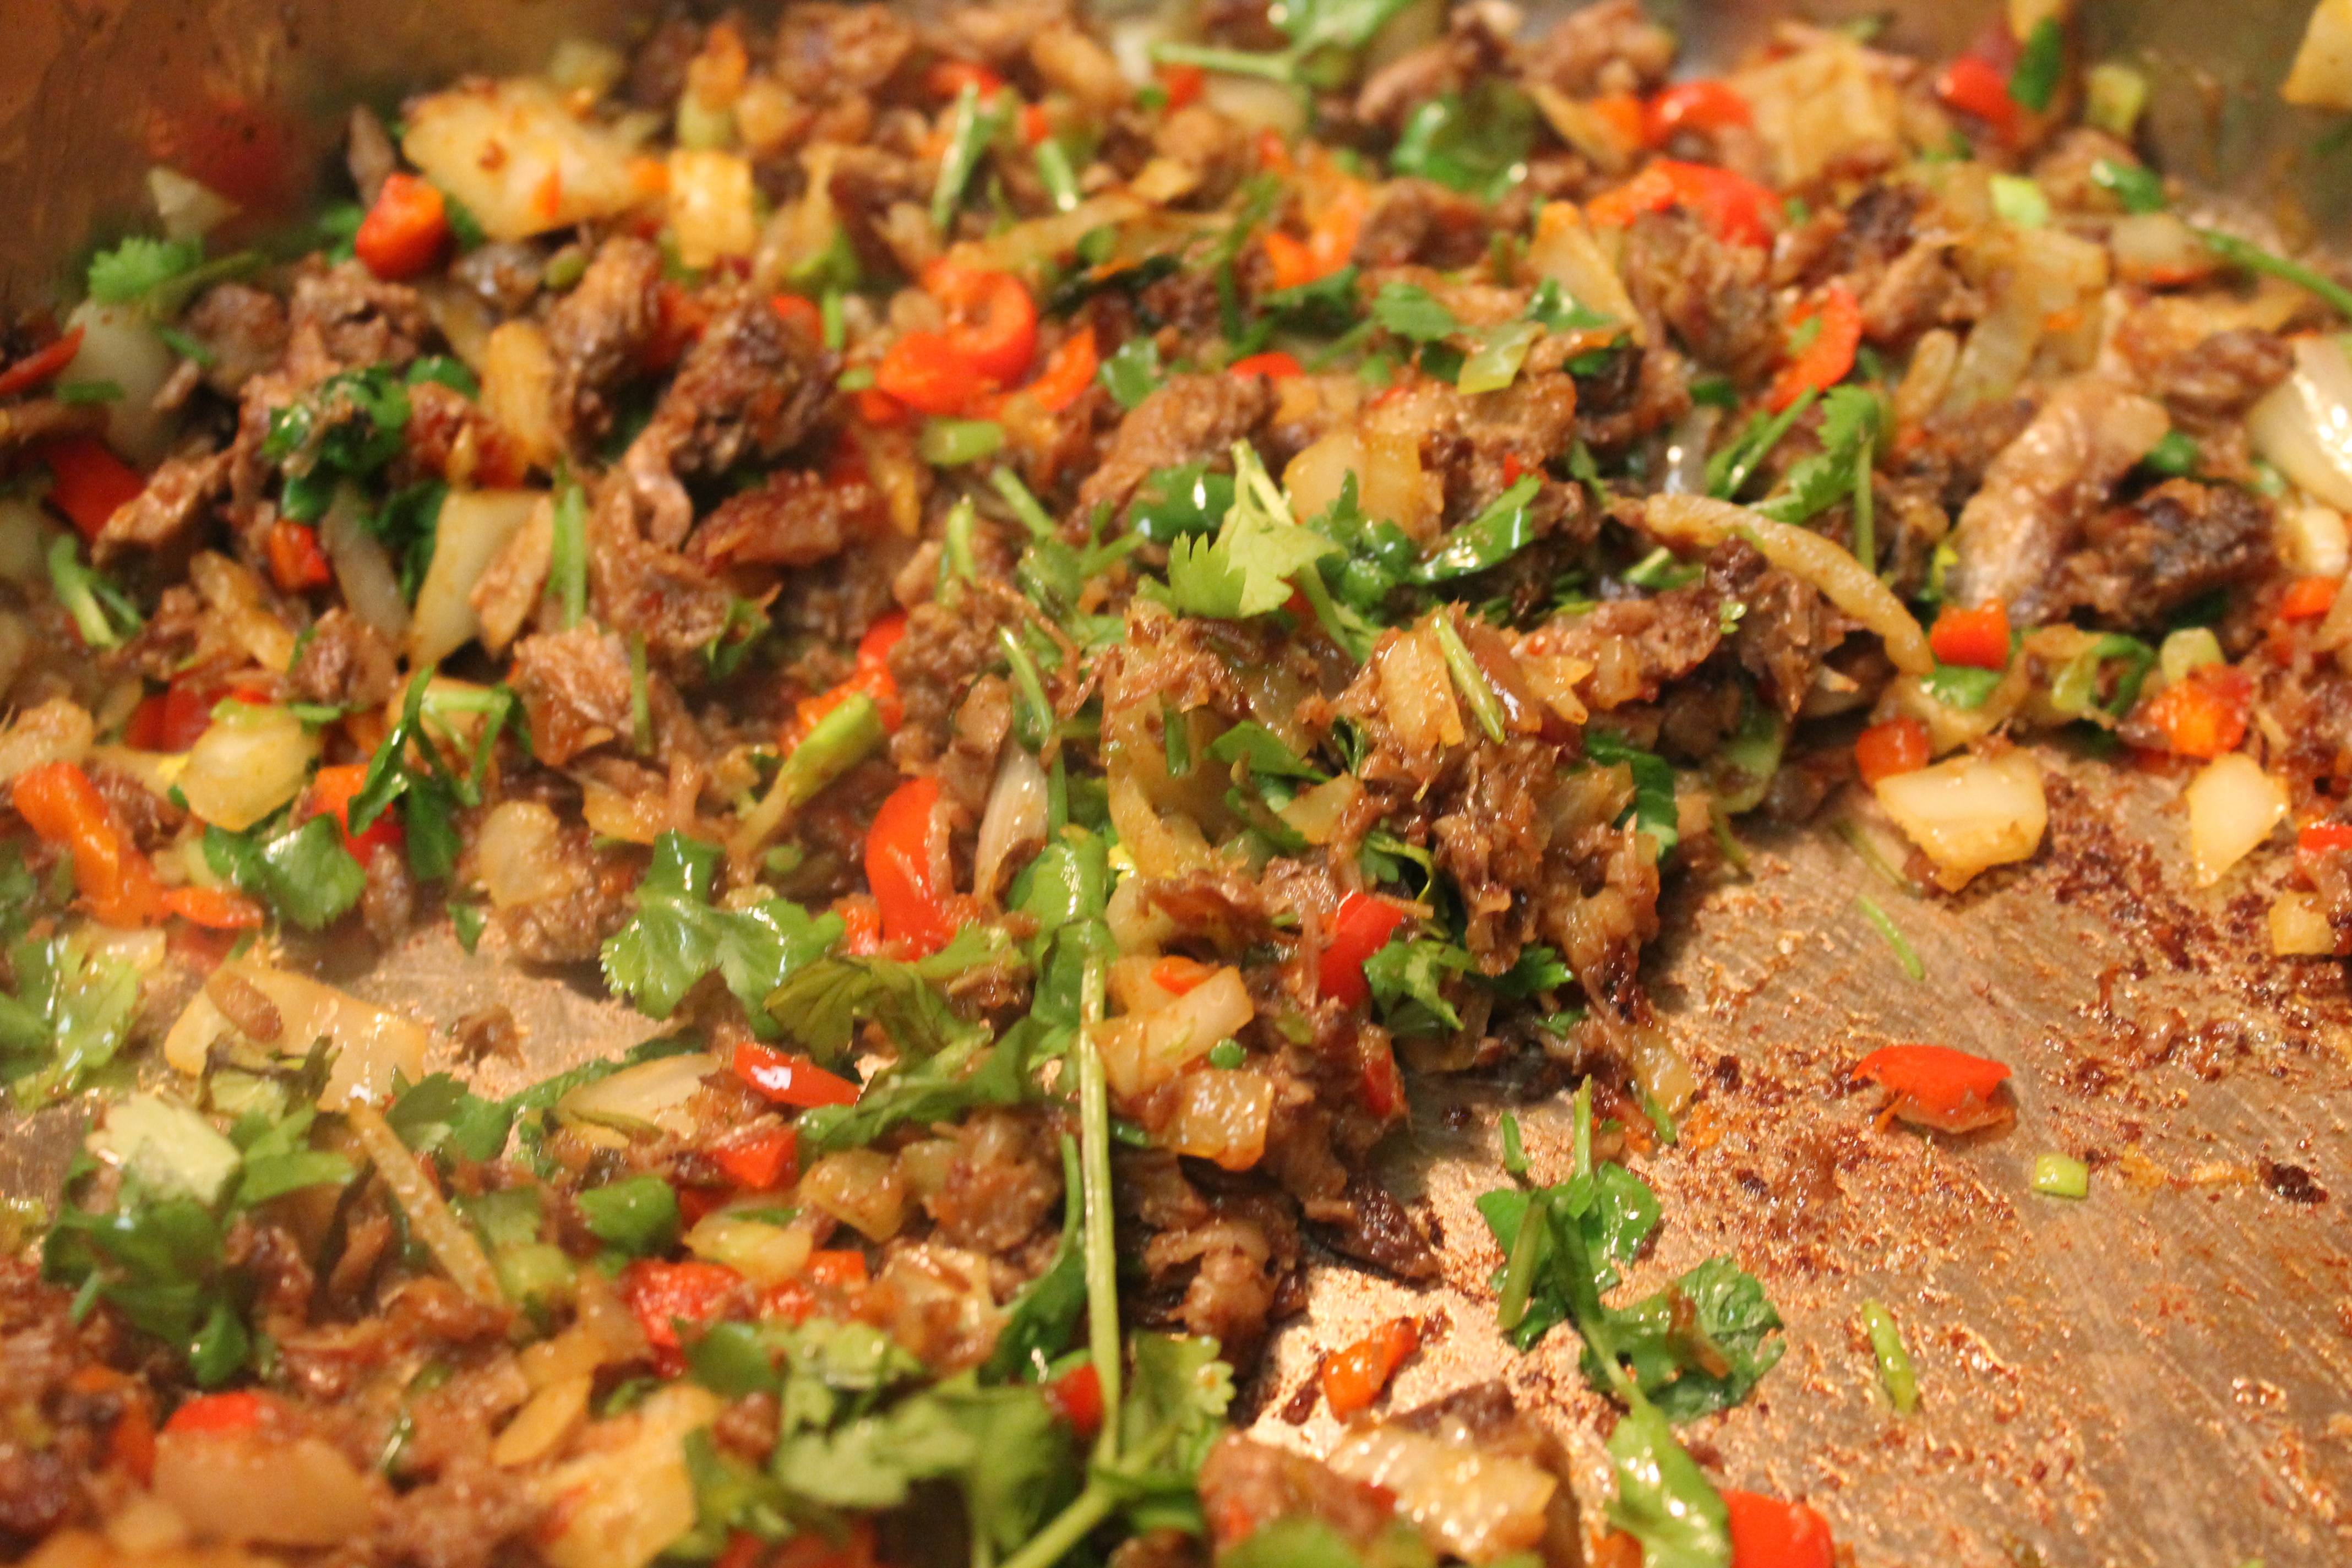 A closeup image of brisket, vegetables, and herbs sauteing in a skillet.